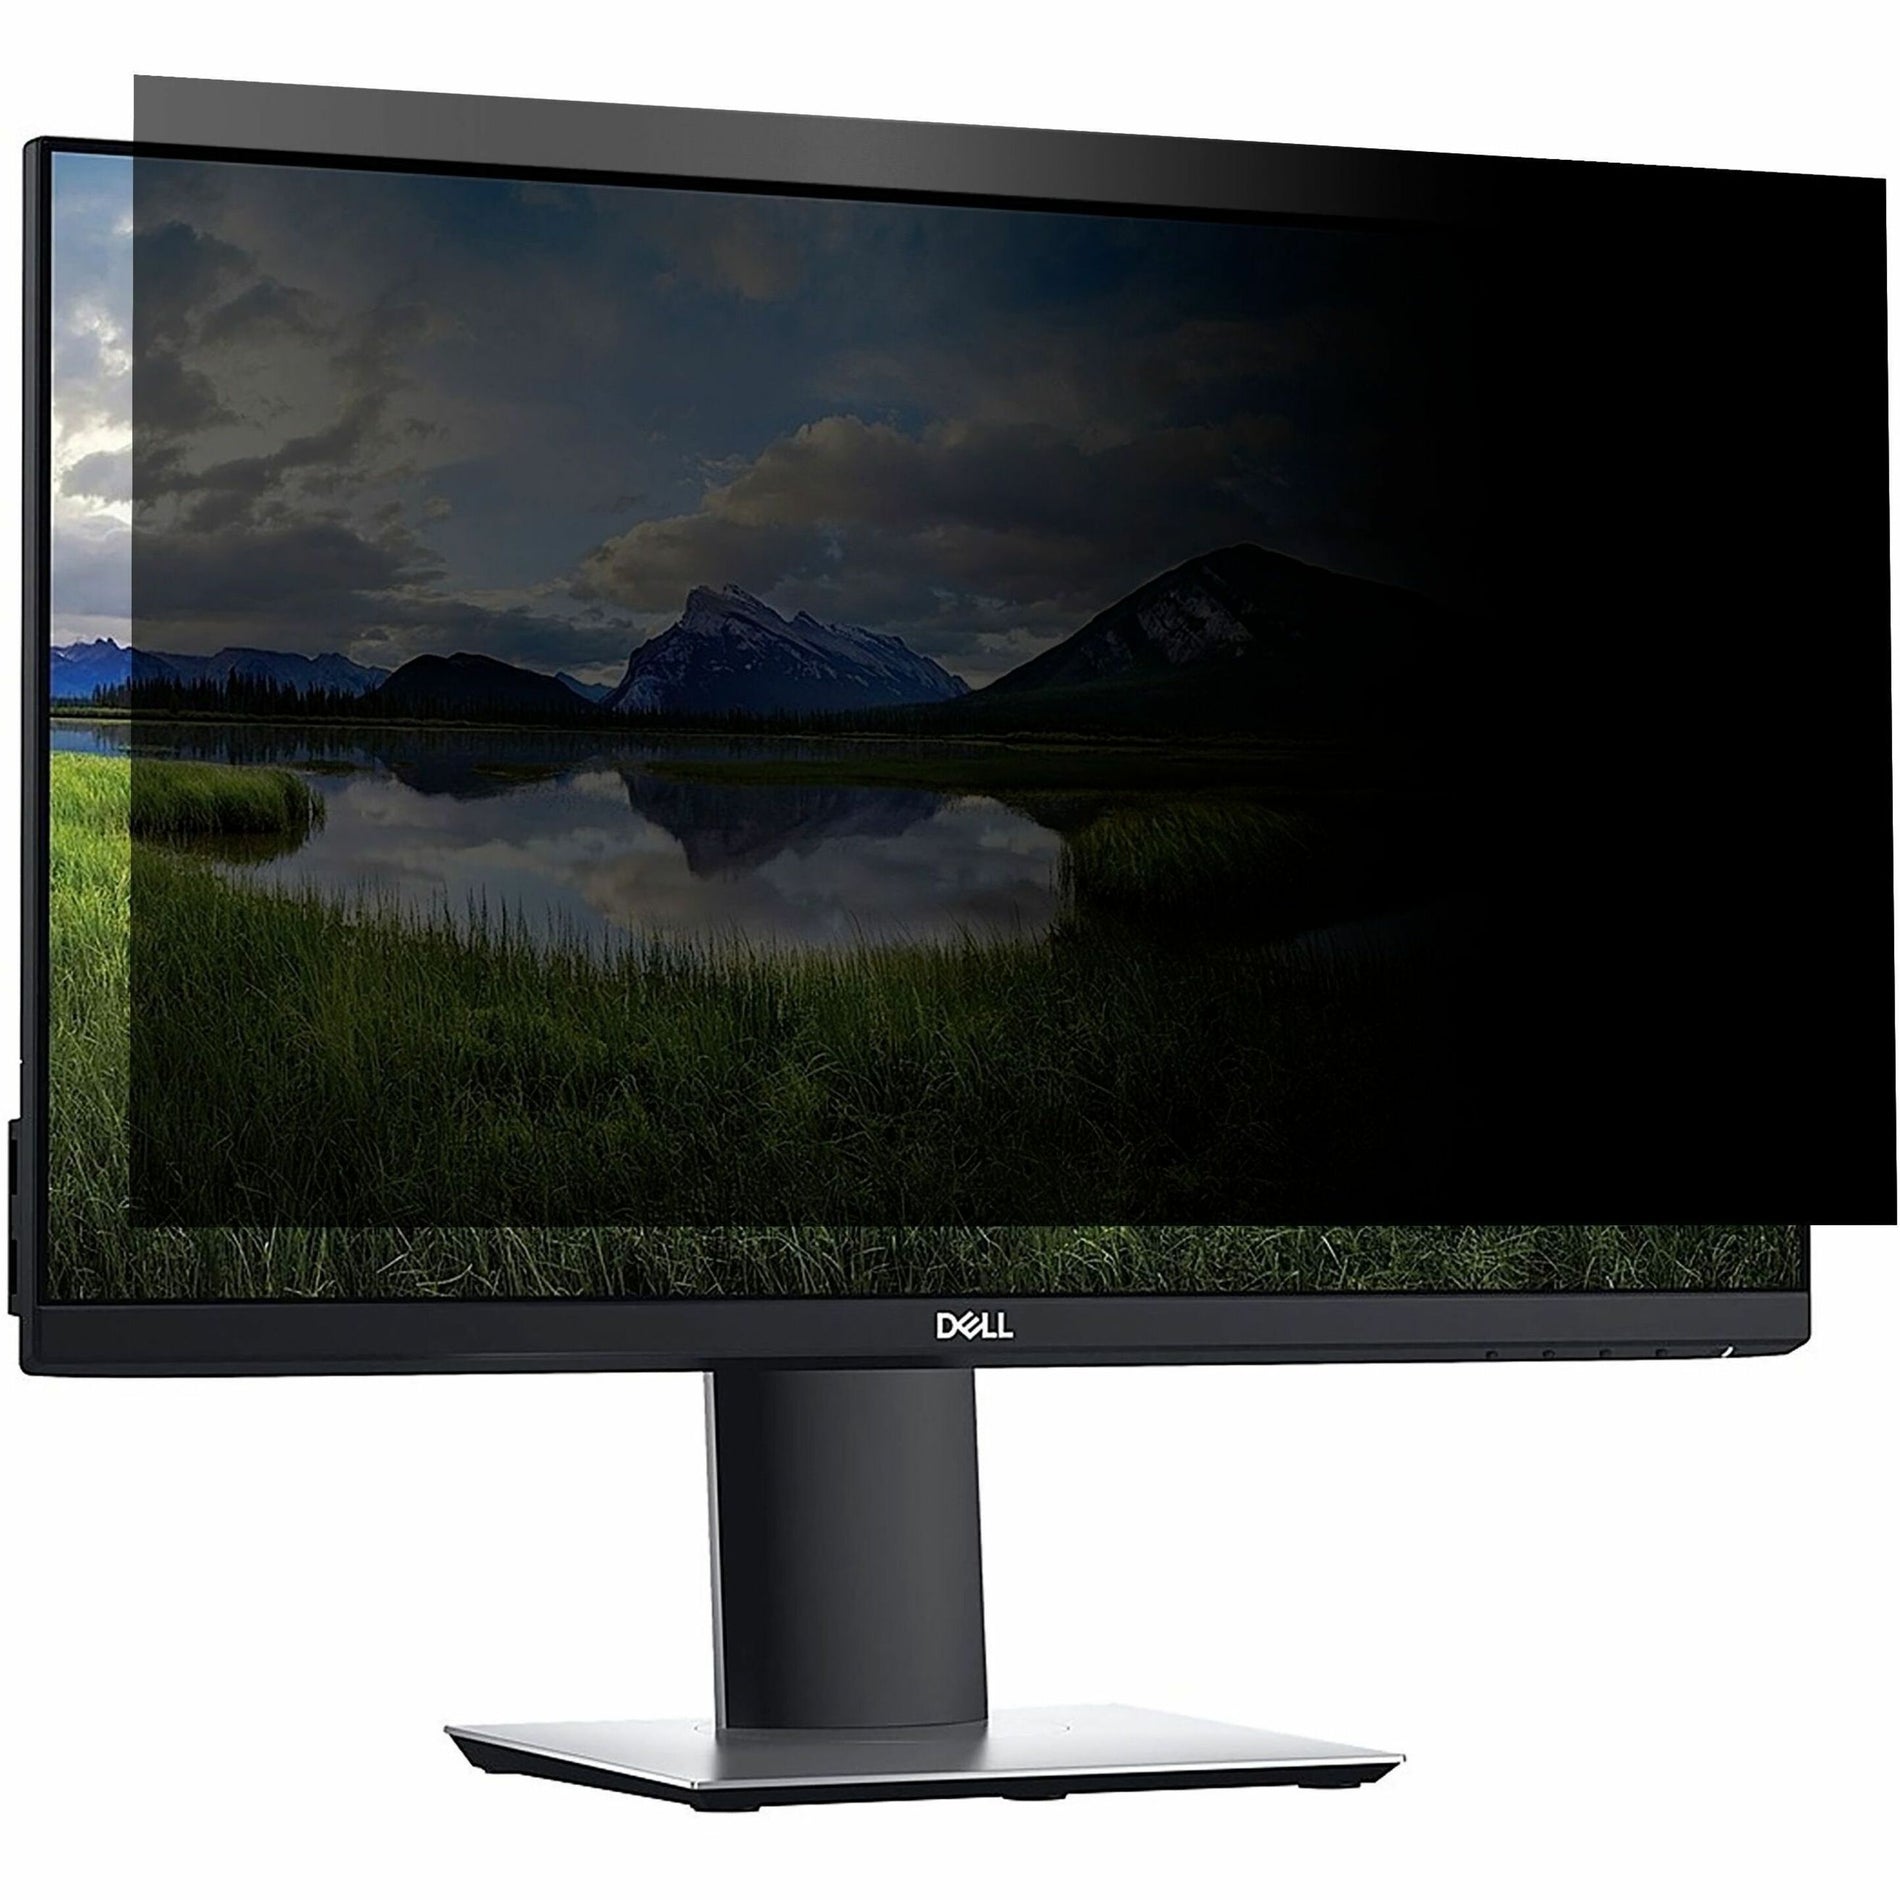 Targus ASF230W9EMGL 4Vu Privacy Screen for 23" Edge to Edge Infinity Monitors (16:9), Magnetic, Antimicrobial, Anti-reflective, Reversible Matte-to-Glossy, Blue Light Reduction